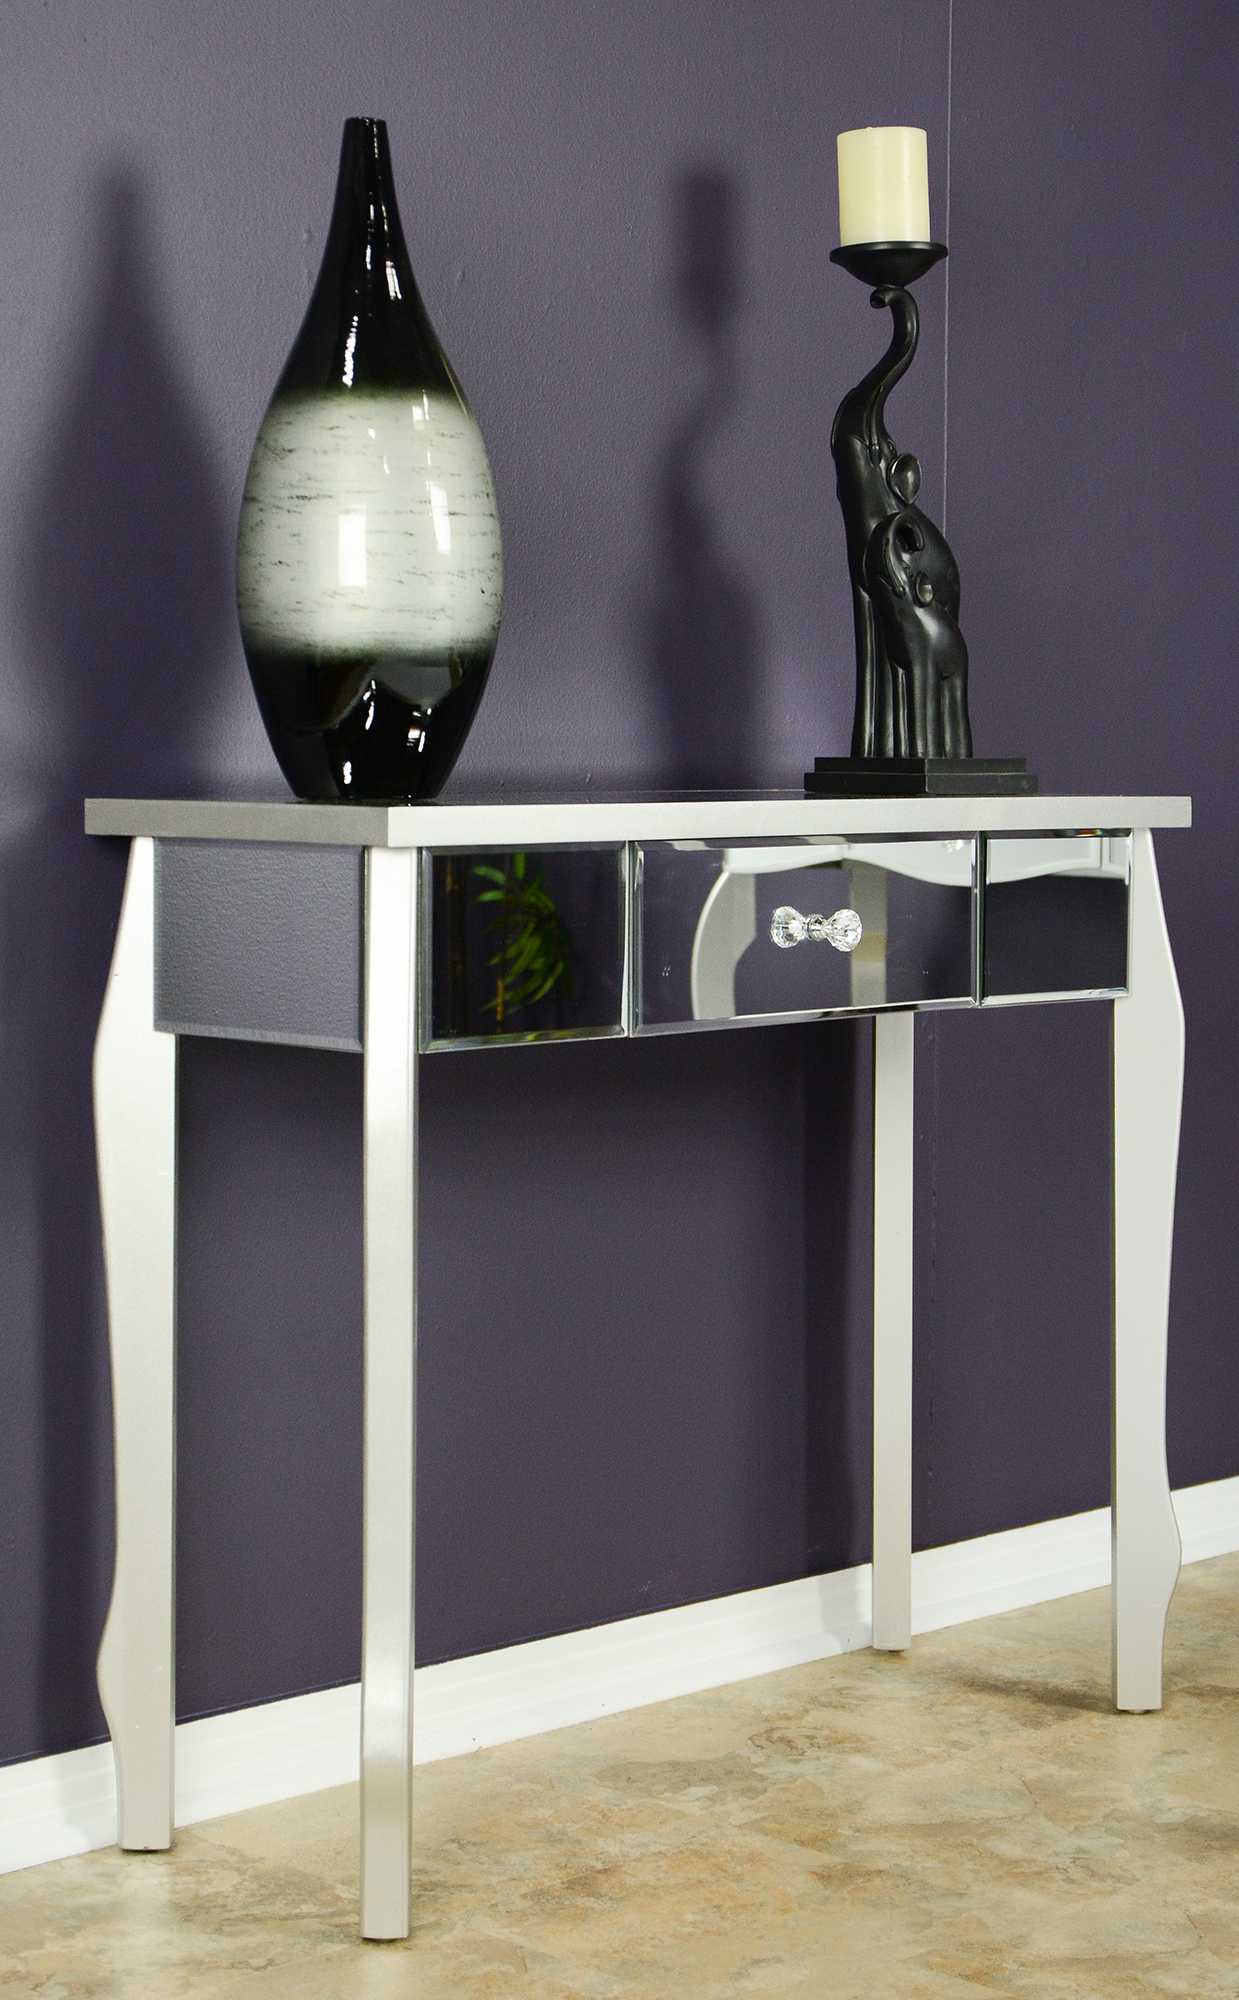 35.5" X 13" X 31" Silver MDF Wood Mirrored Glass Console Table with Mirrored Glass Inserts and a Drawer